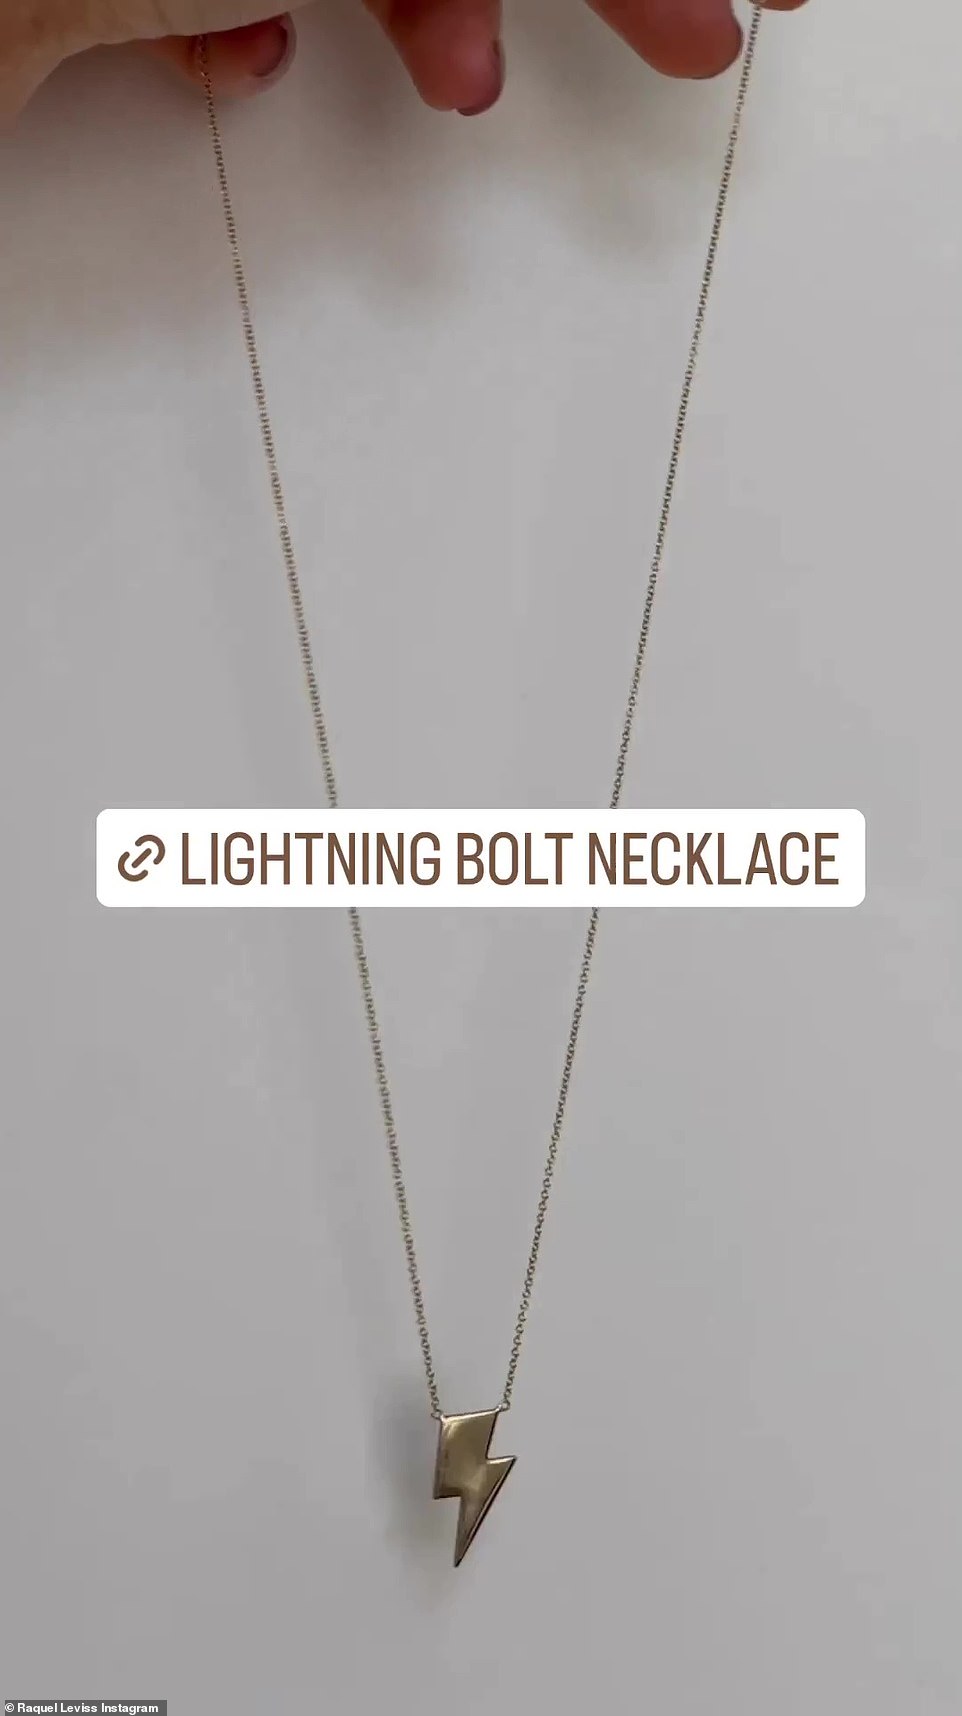 Leviss wore the infamous lightning bolt necklace amid her months-long affair with ex Sandoval, 40, last year. Raquel announced the auction earlier this month. While in 'the process of letting go' of possessions that 'no longer serve' her, the star told her more than 633,000 Instagram followers that a few of the most well-known Scandoval pieces are available for purchase. 'I'm cleaning out my closet, I have found a few items that are a little bit triggering,' she said in a video, uploaded to her social media accounts. While speaking about the items that she listed on eBay, the TV personality confessed that she never wants to 'see them' or 'wear them again.'